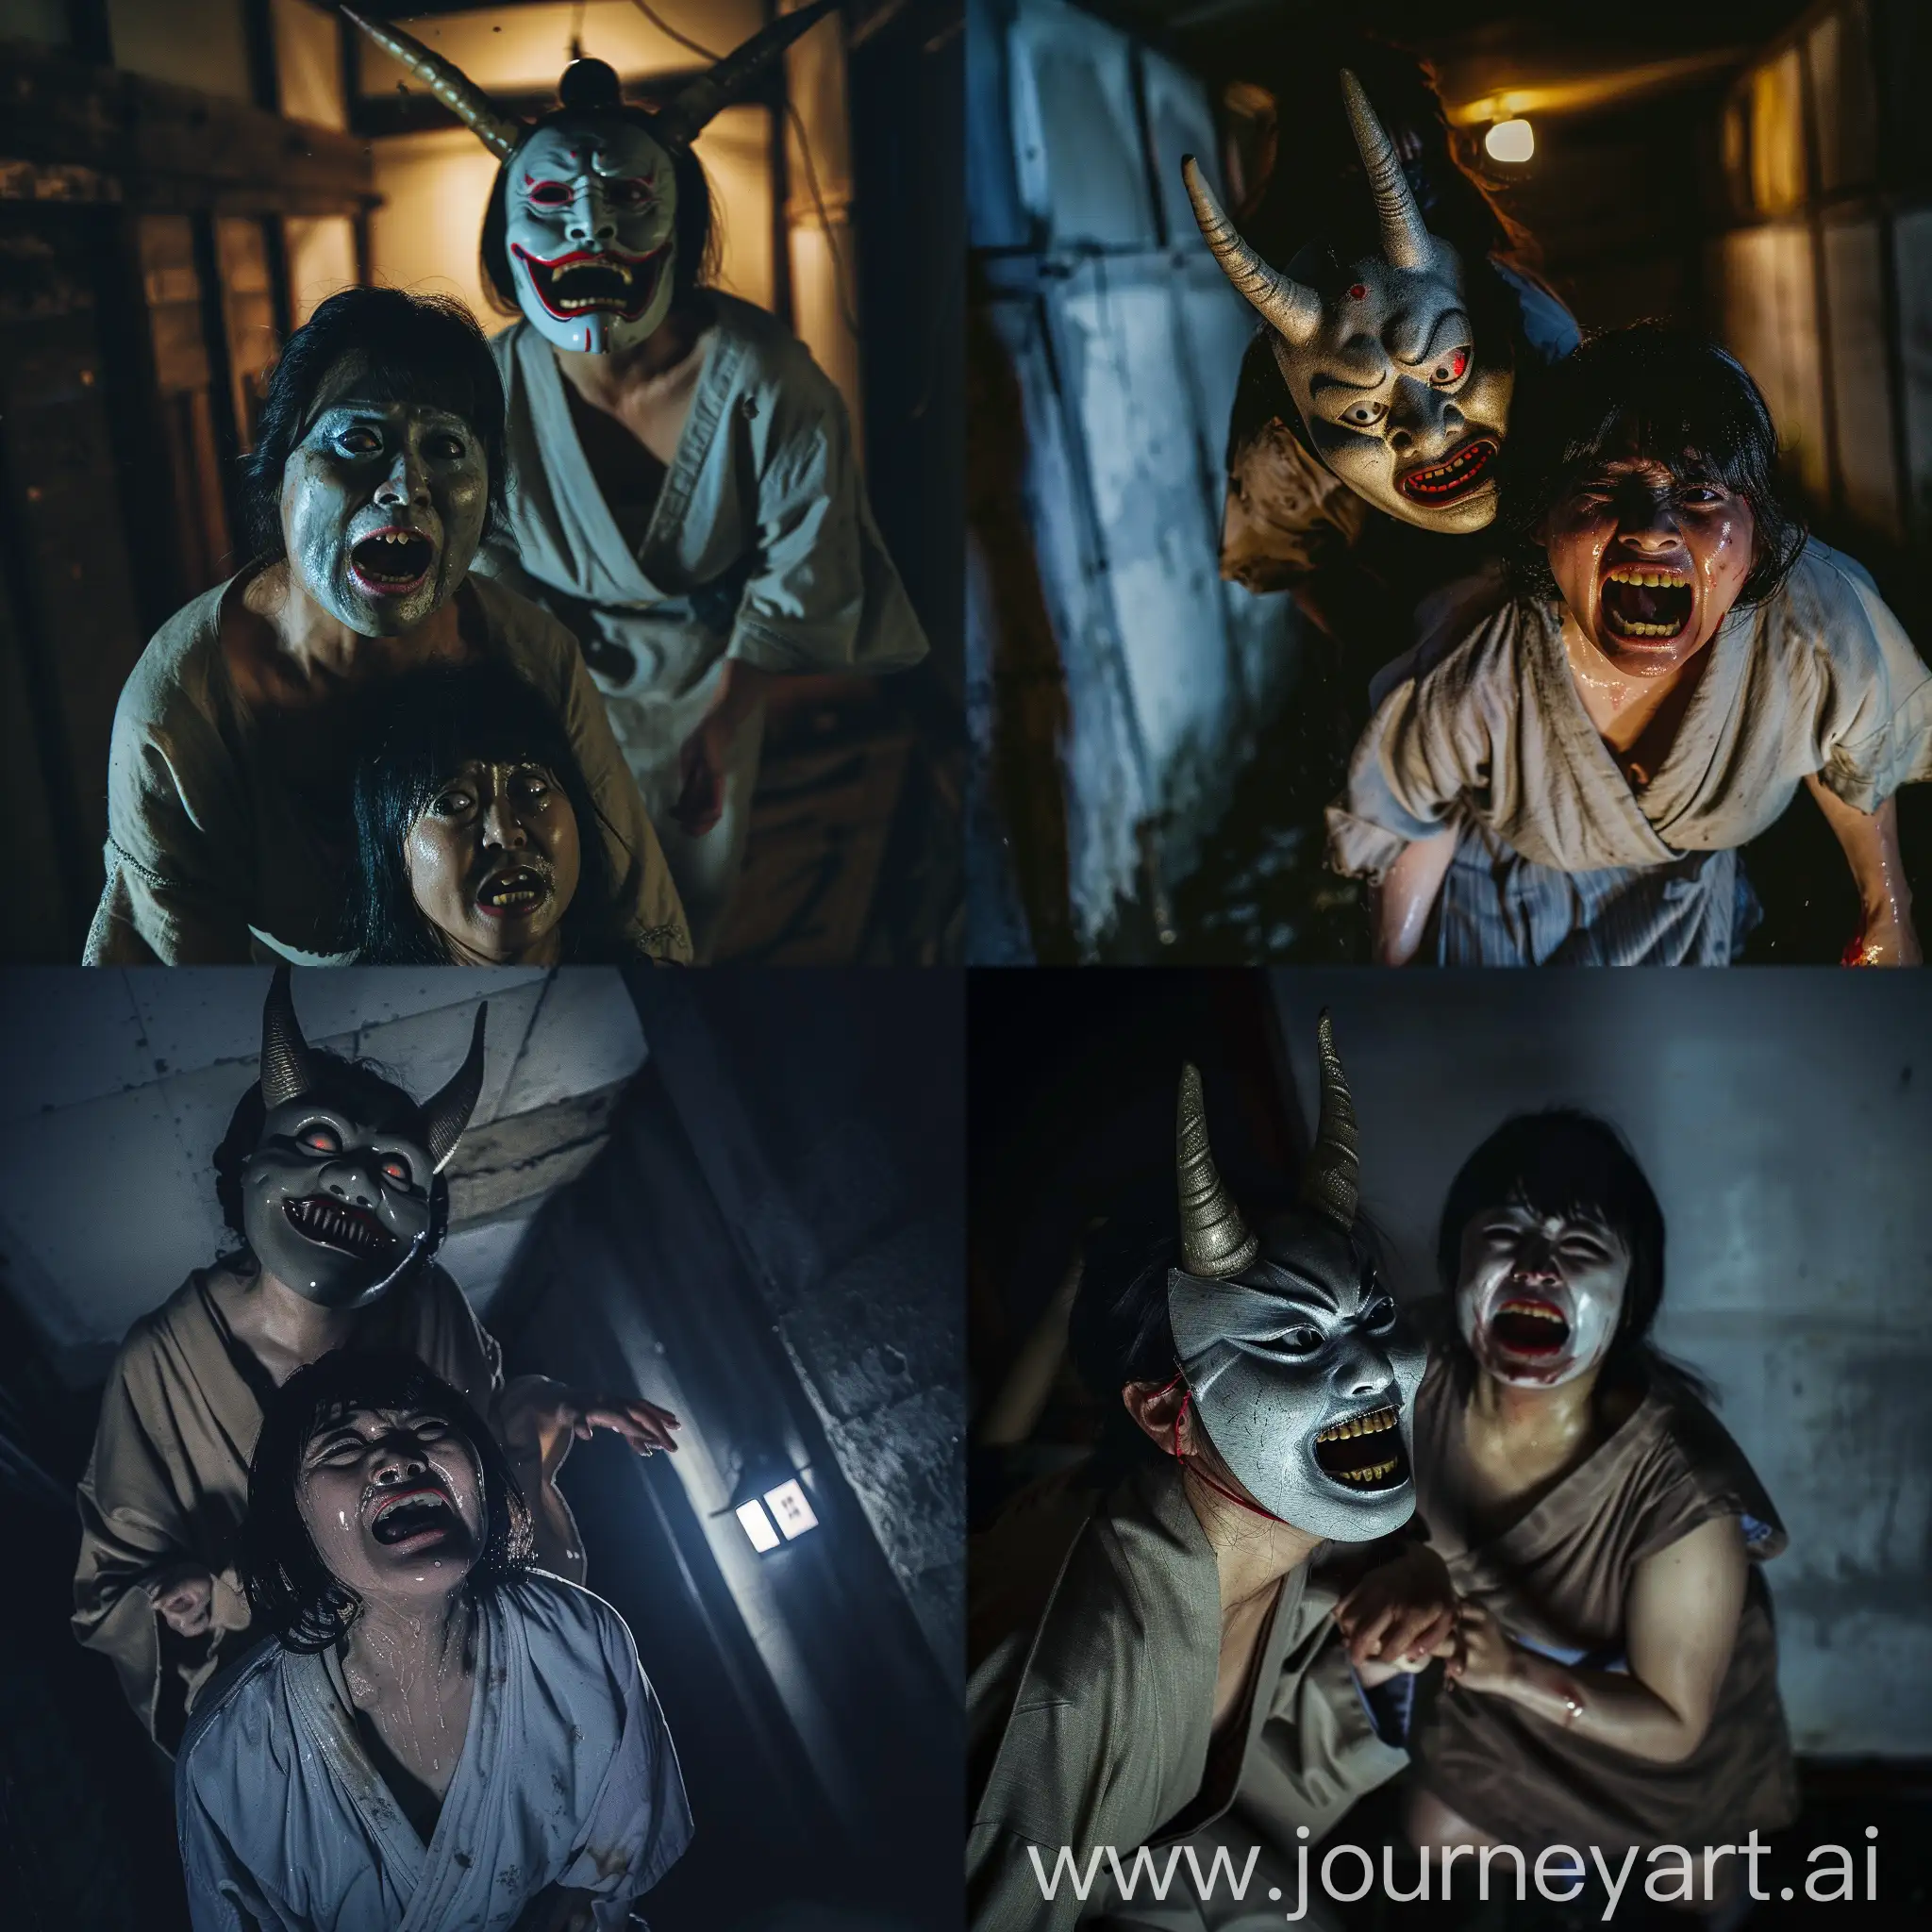 A Japanese woman with Japanese scary mask with horns chasing a Japanese woman which is crying and scared at dark basement, Japanese horror movie scene, cinematic lighting